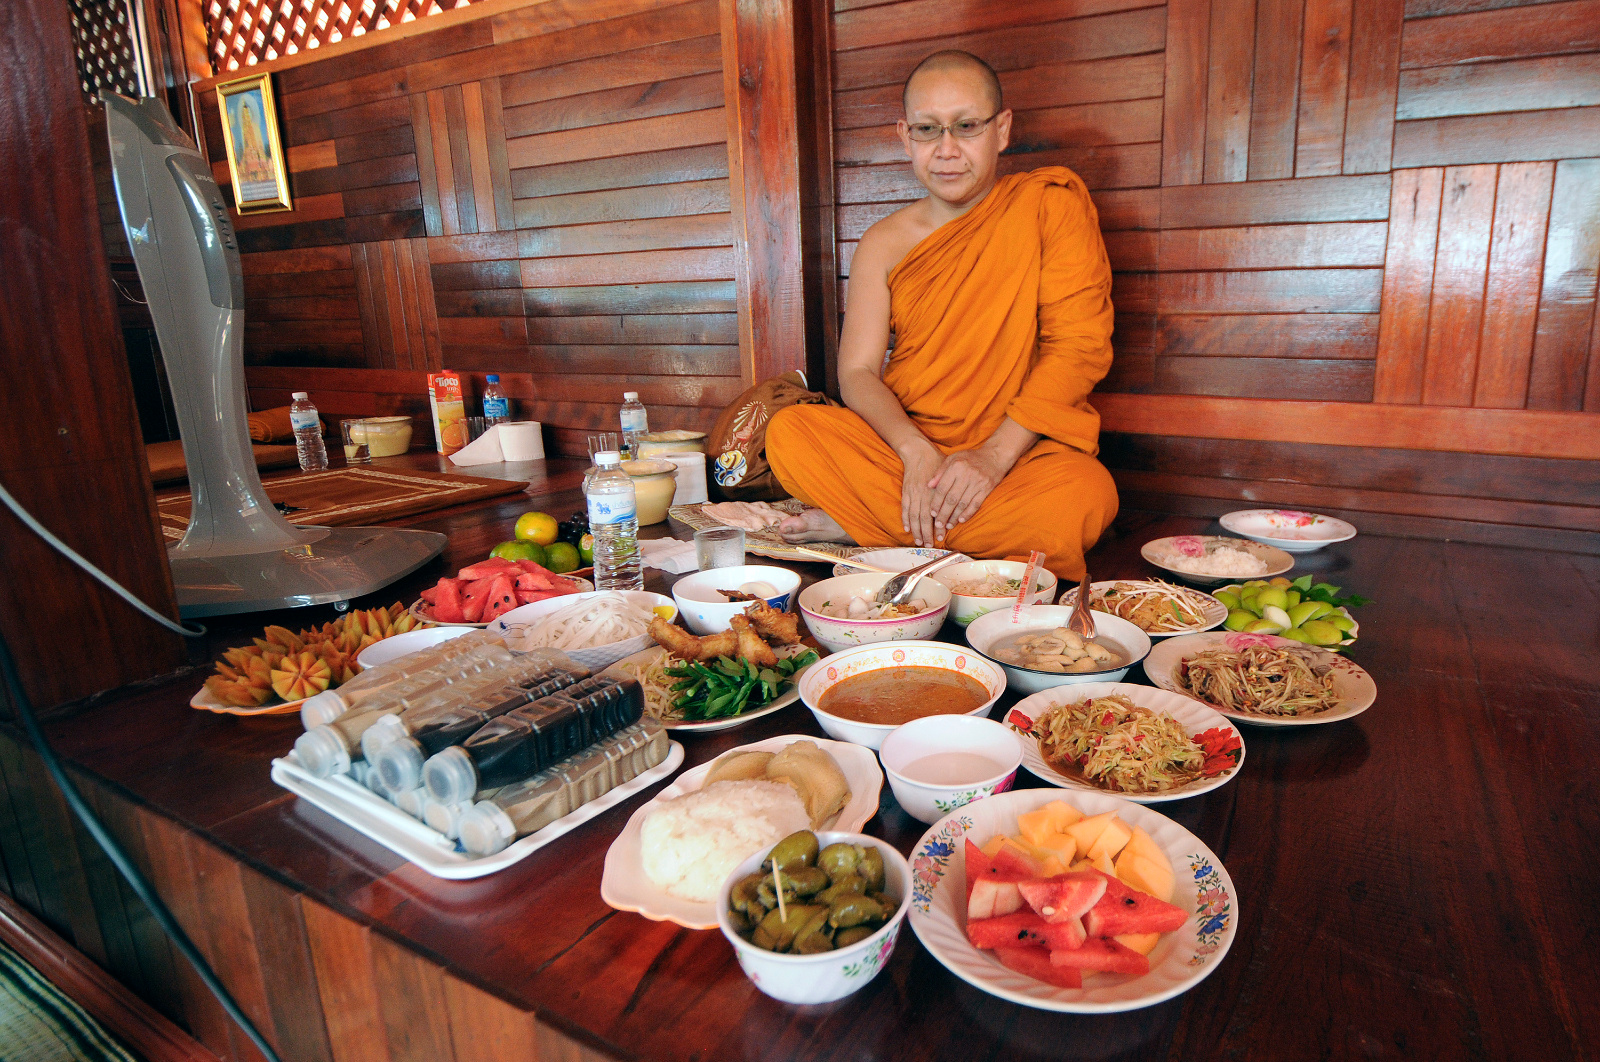 Buddhism Lunch for a monk